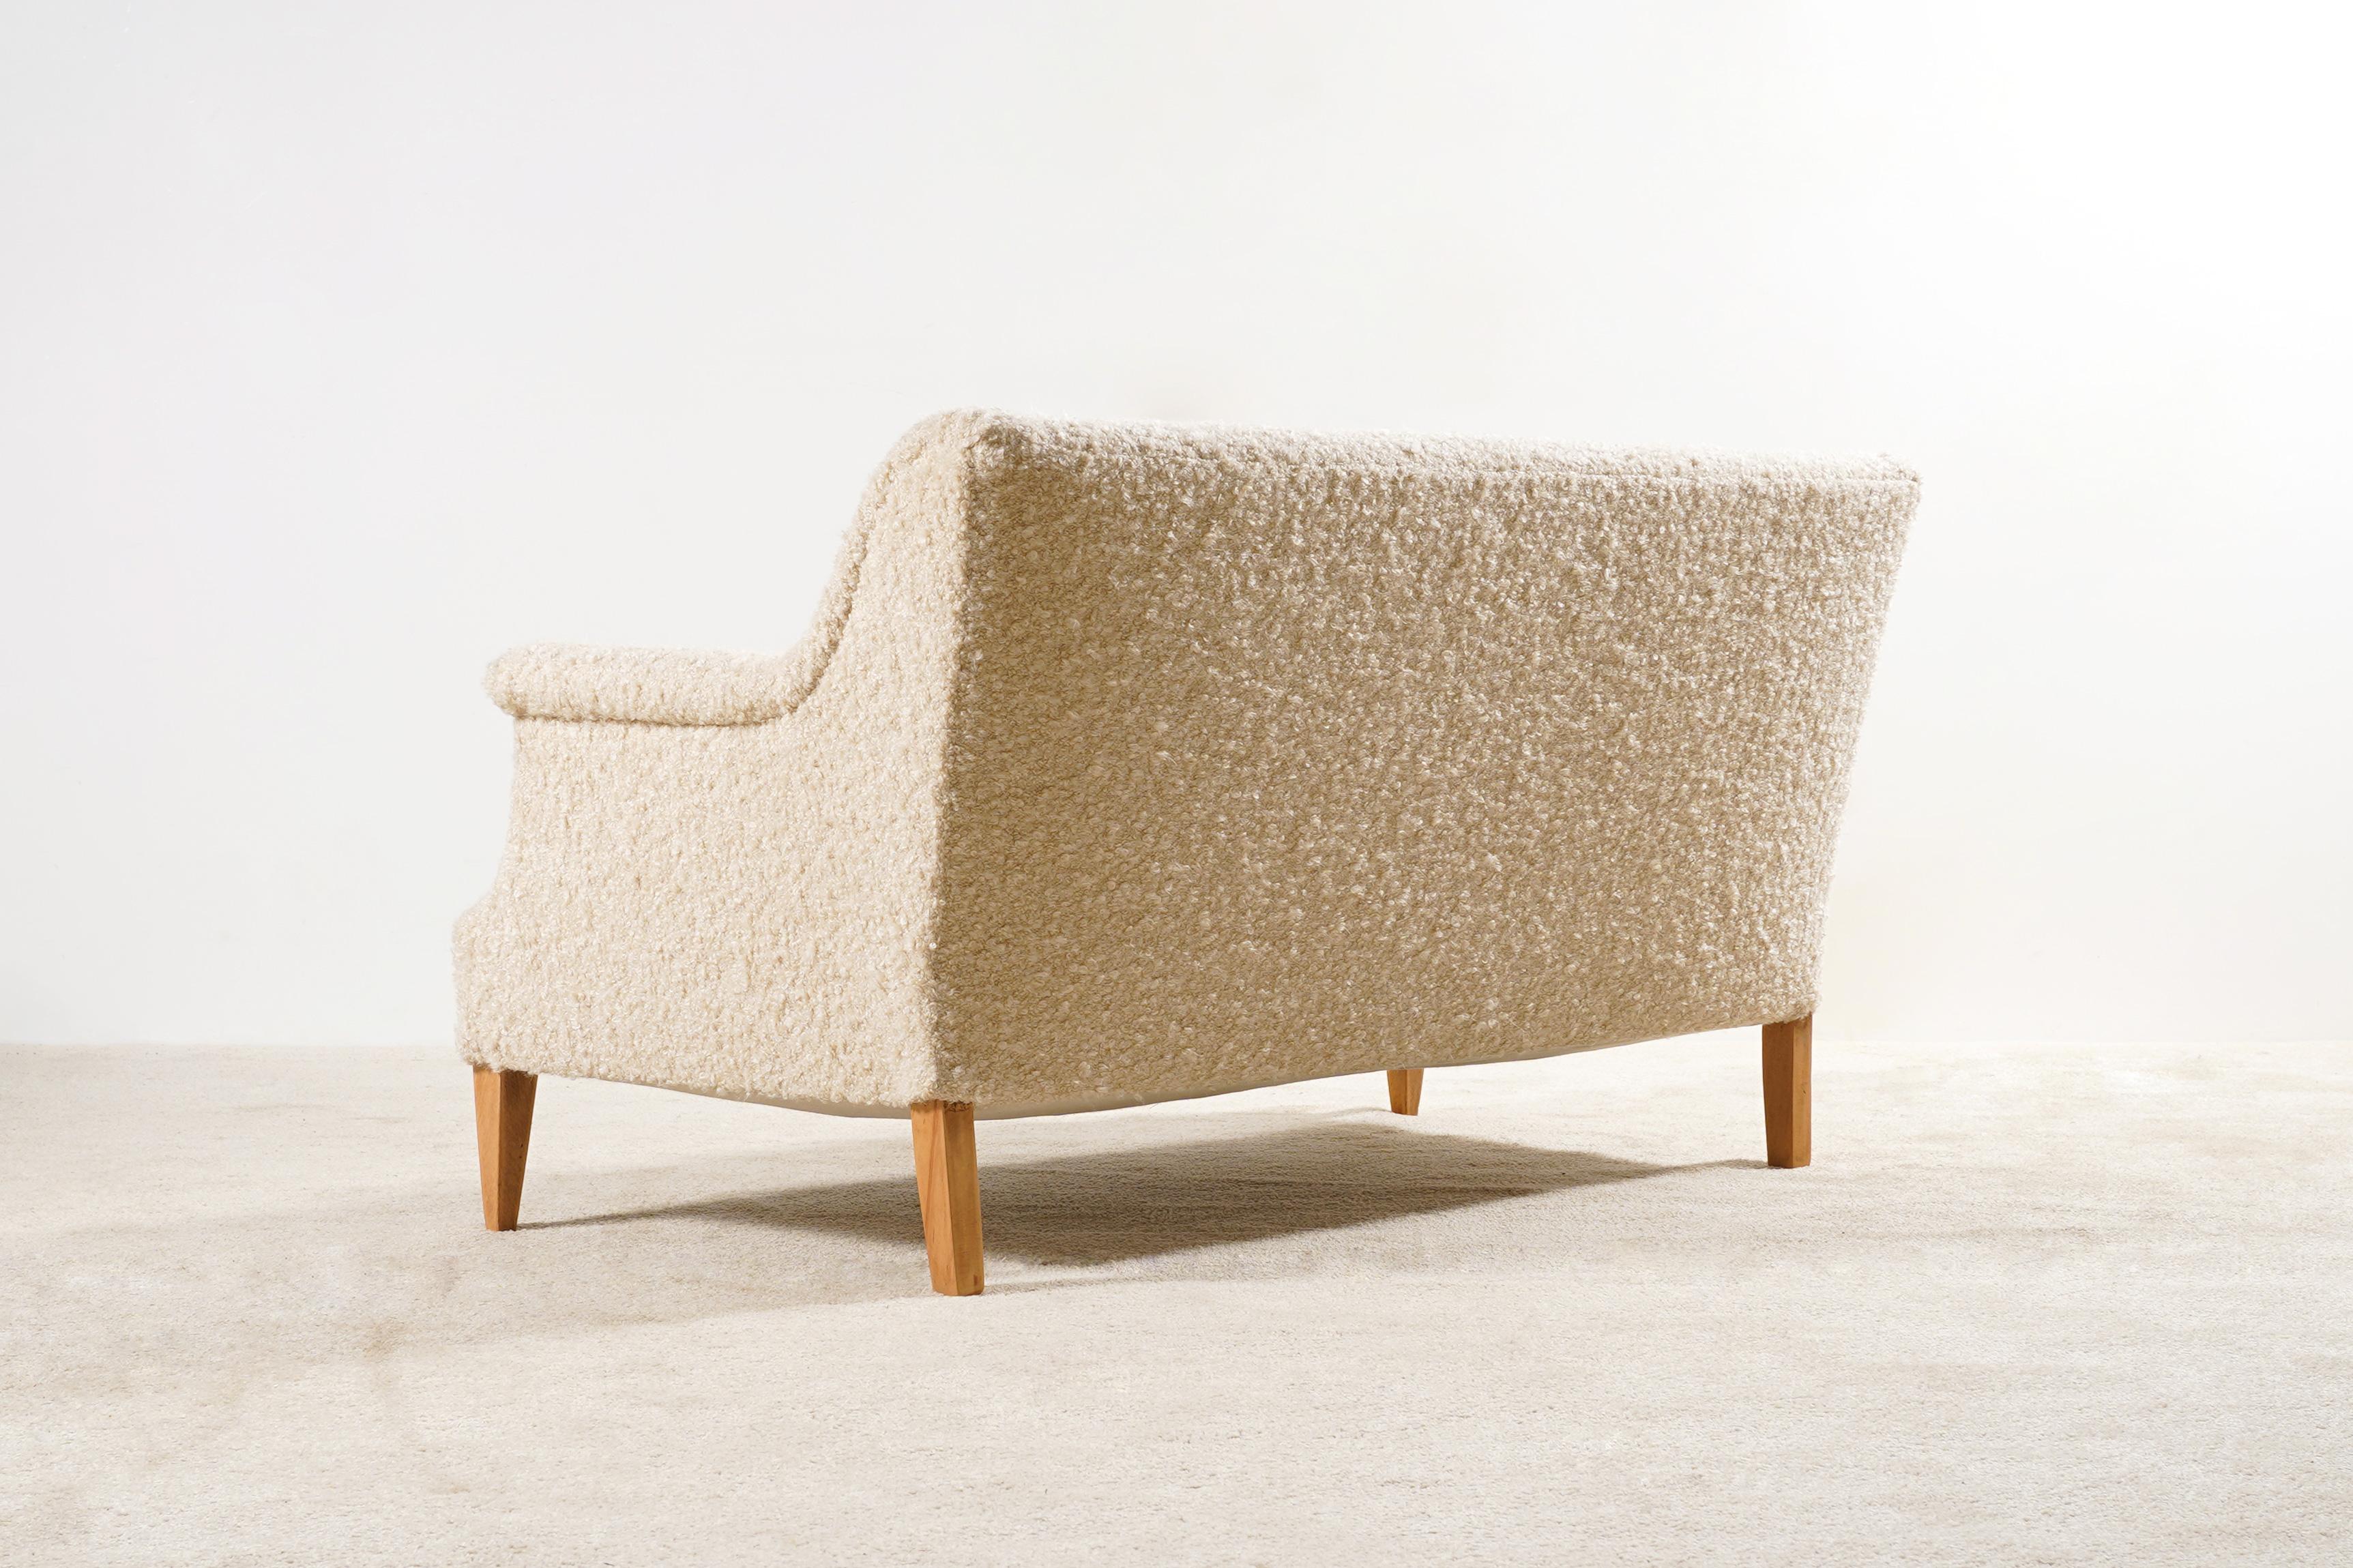 Mid-20th Century Two-Seat Danish Sofa, Original Piece from the 1940s Newly Upholstered